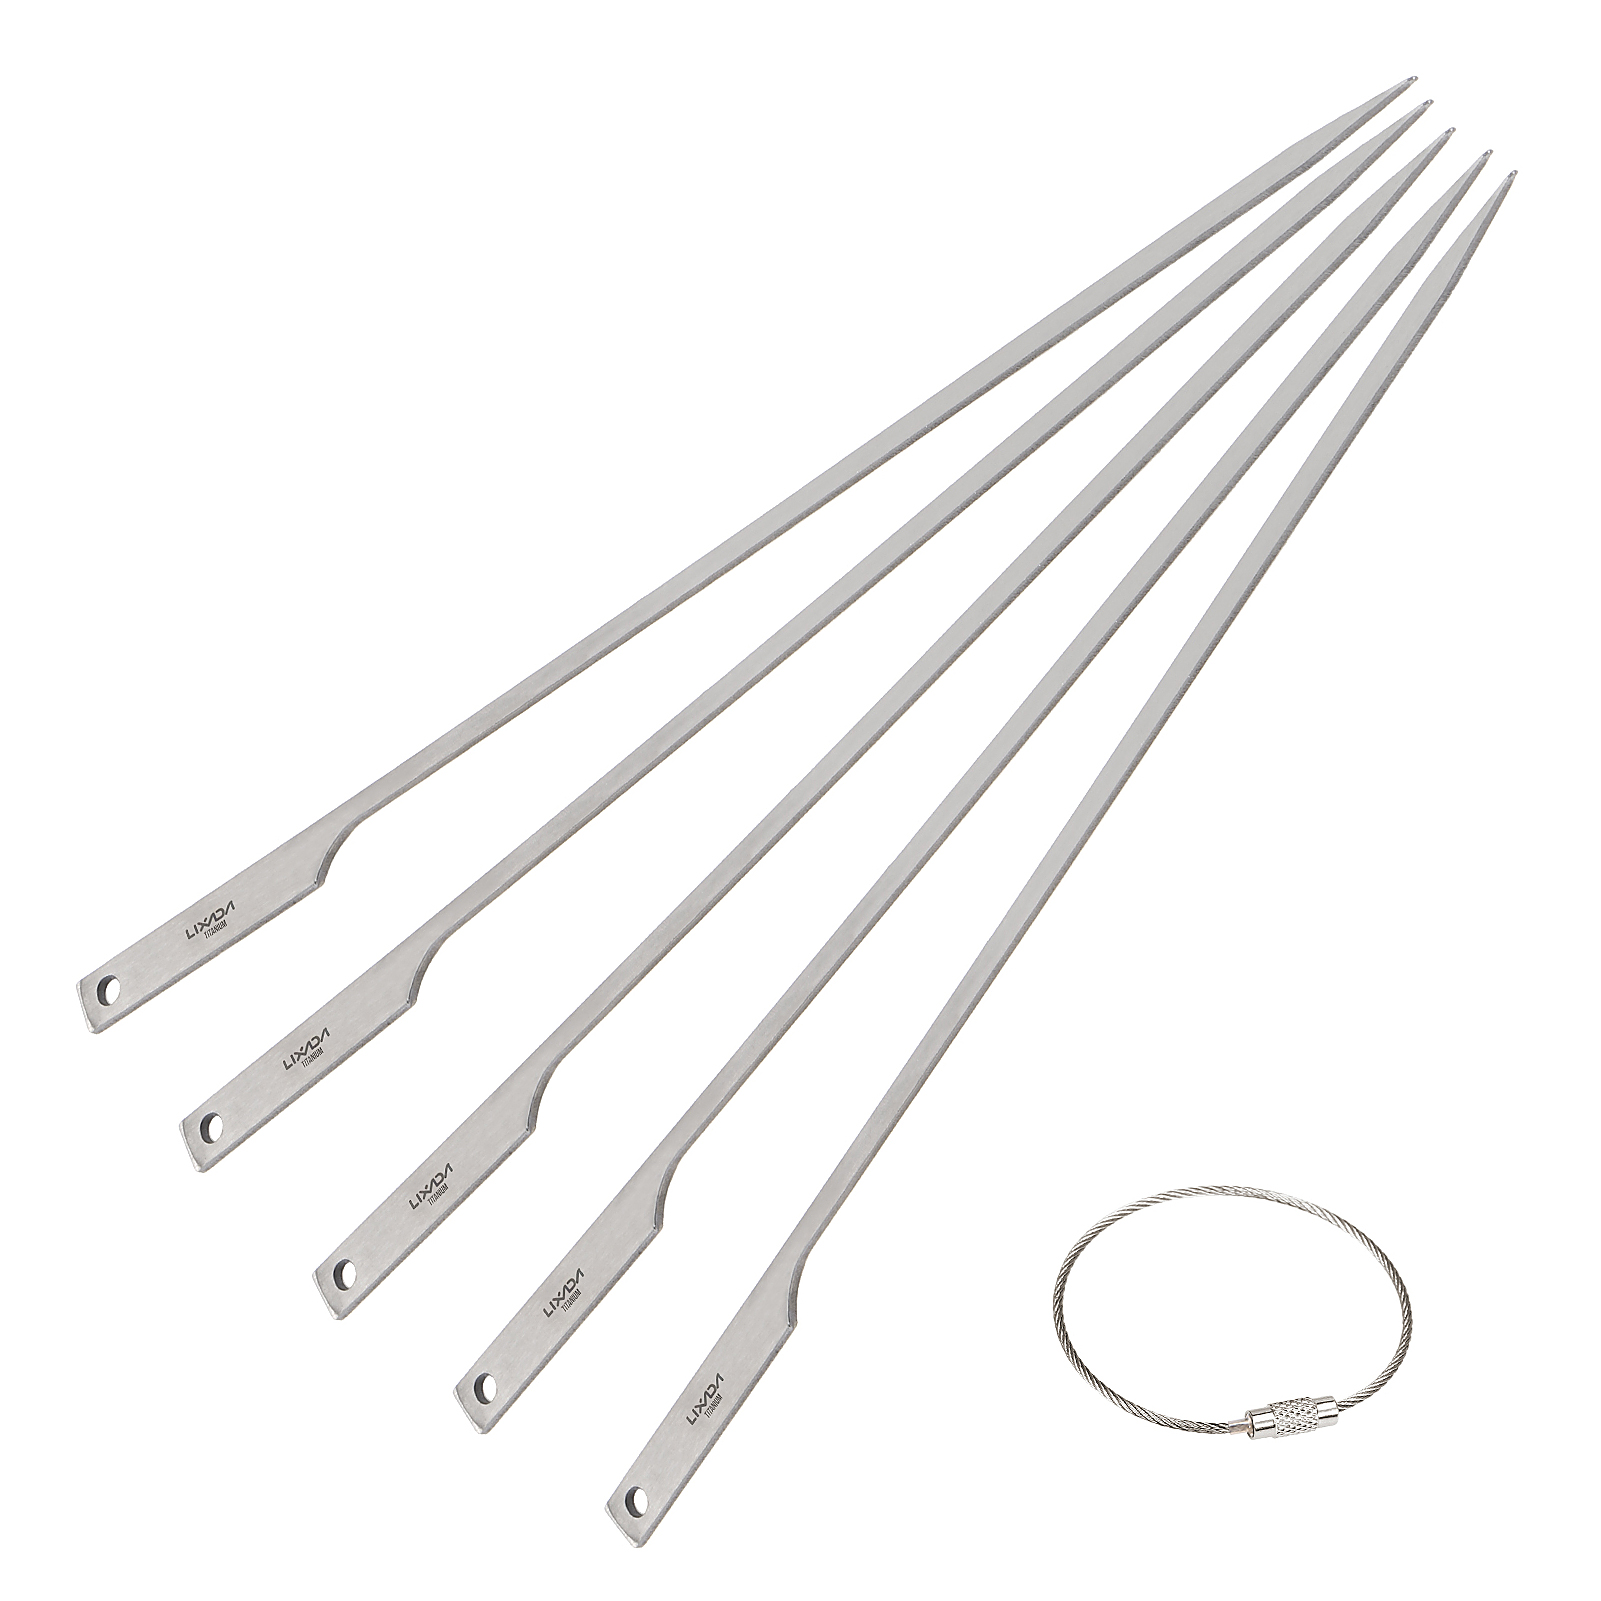 Lixada 5pcs 10 Inch Flat  Barbecue Skewers  Backyard Picnic BBQ Grilling Kabob Skewers BBQ  with Wire Ring - image 1 of 7